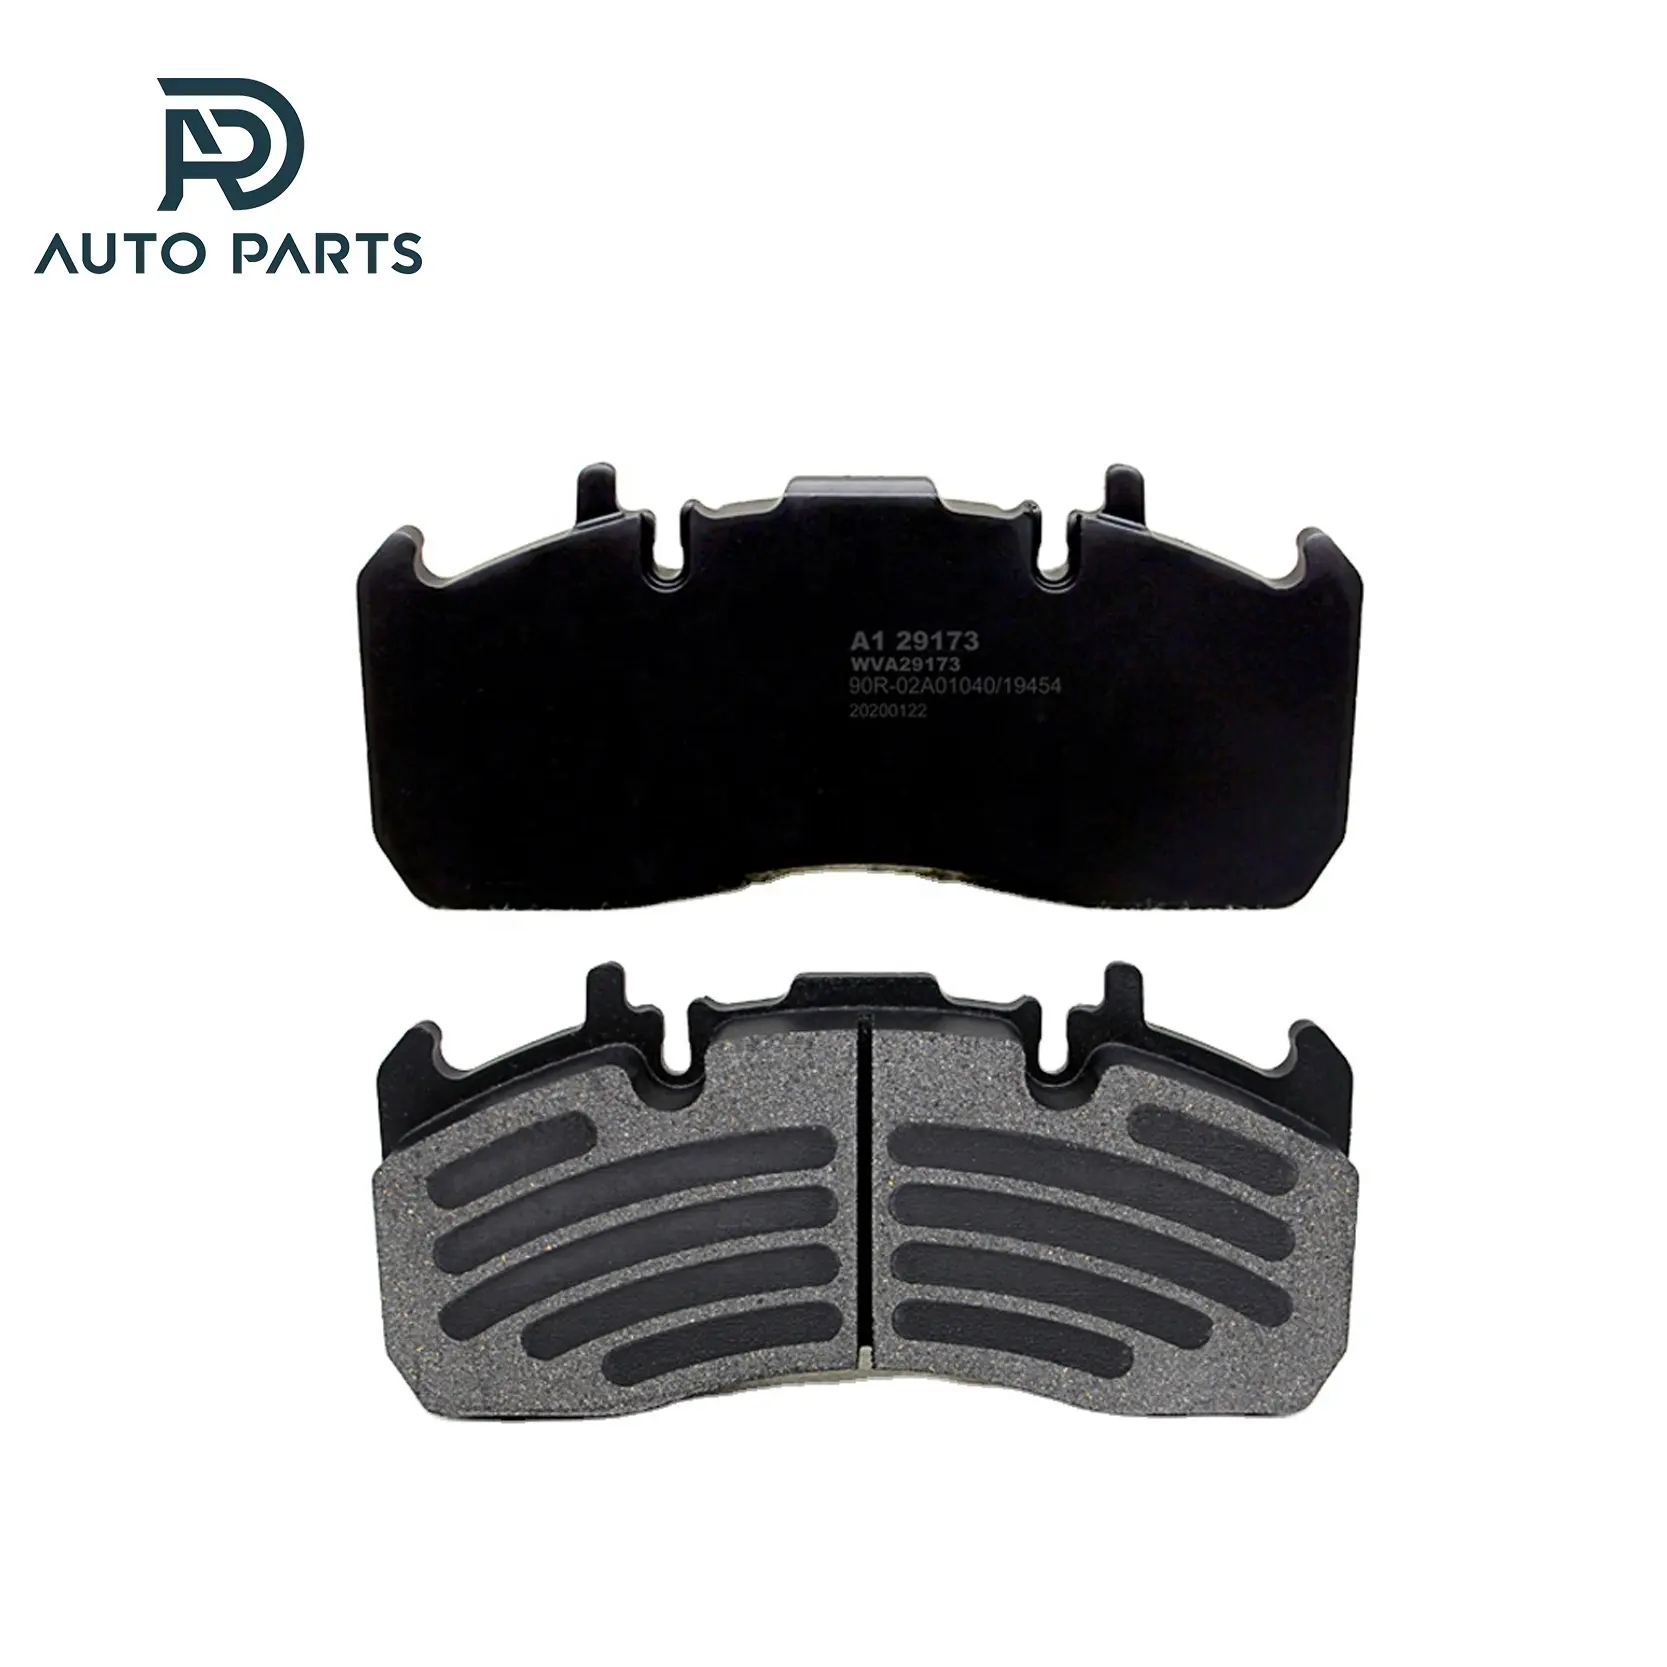 China factory supplies wholesale high quality auto parts 29165 brake pad 29173 Truck brake pad set 29173 for RENAULT TRUCKS